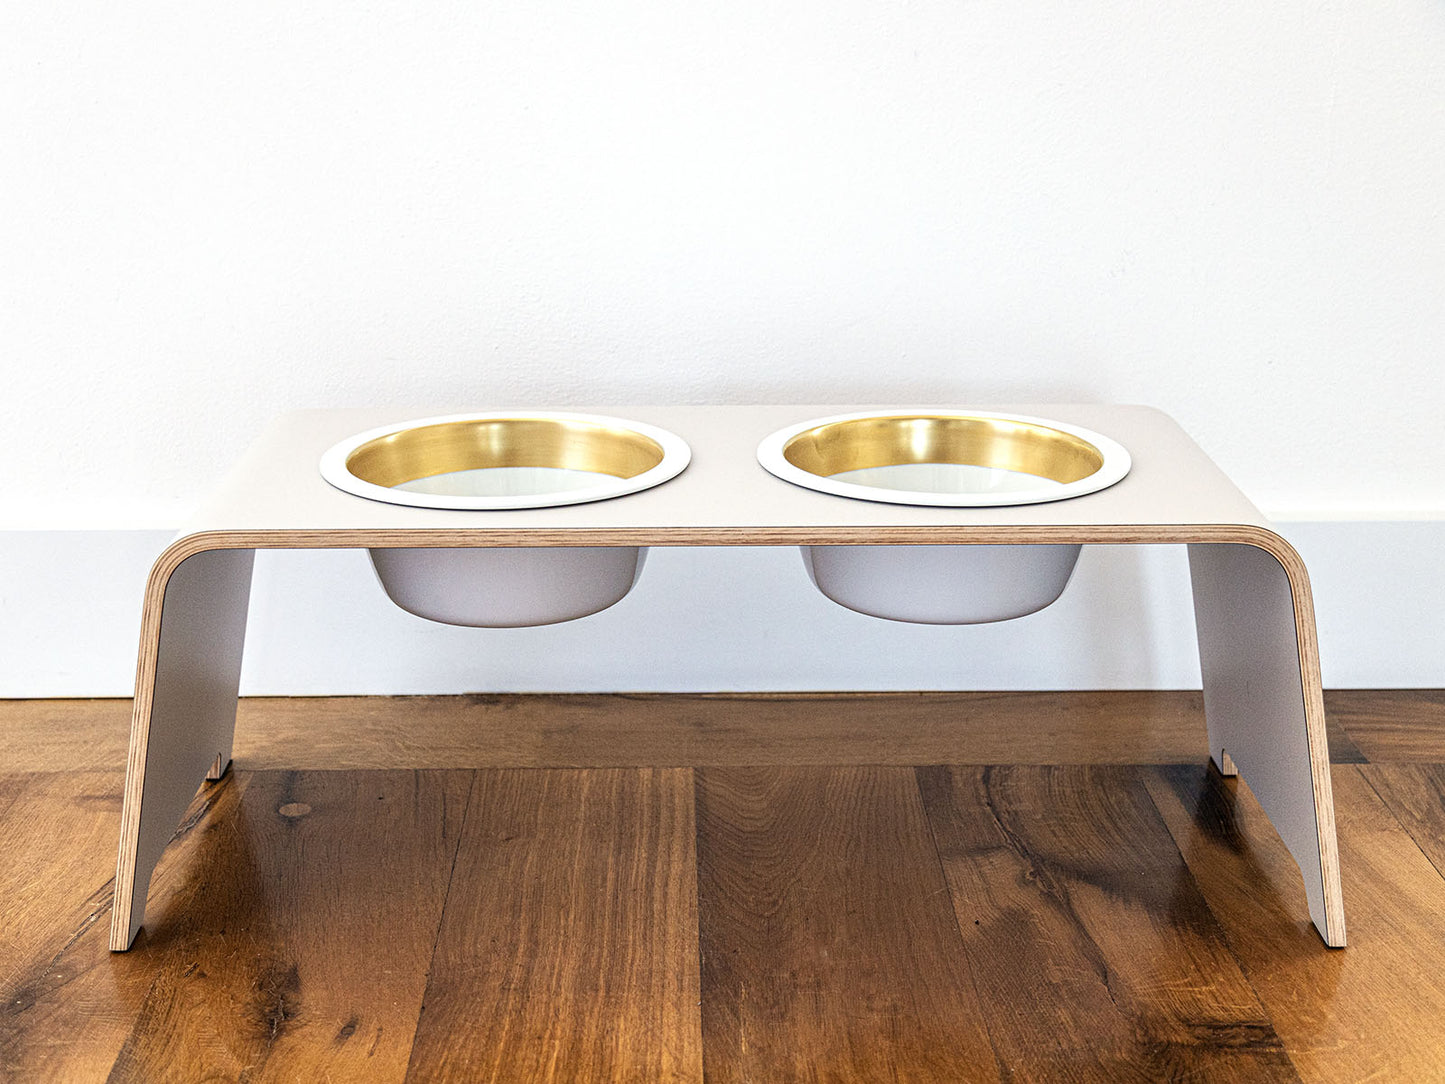 Surcharge GOLD Edition for two porcelain bowls of the dogBar® L